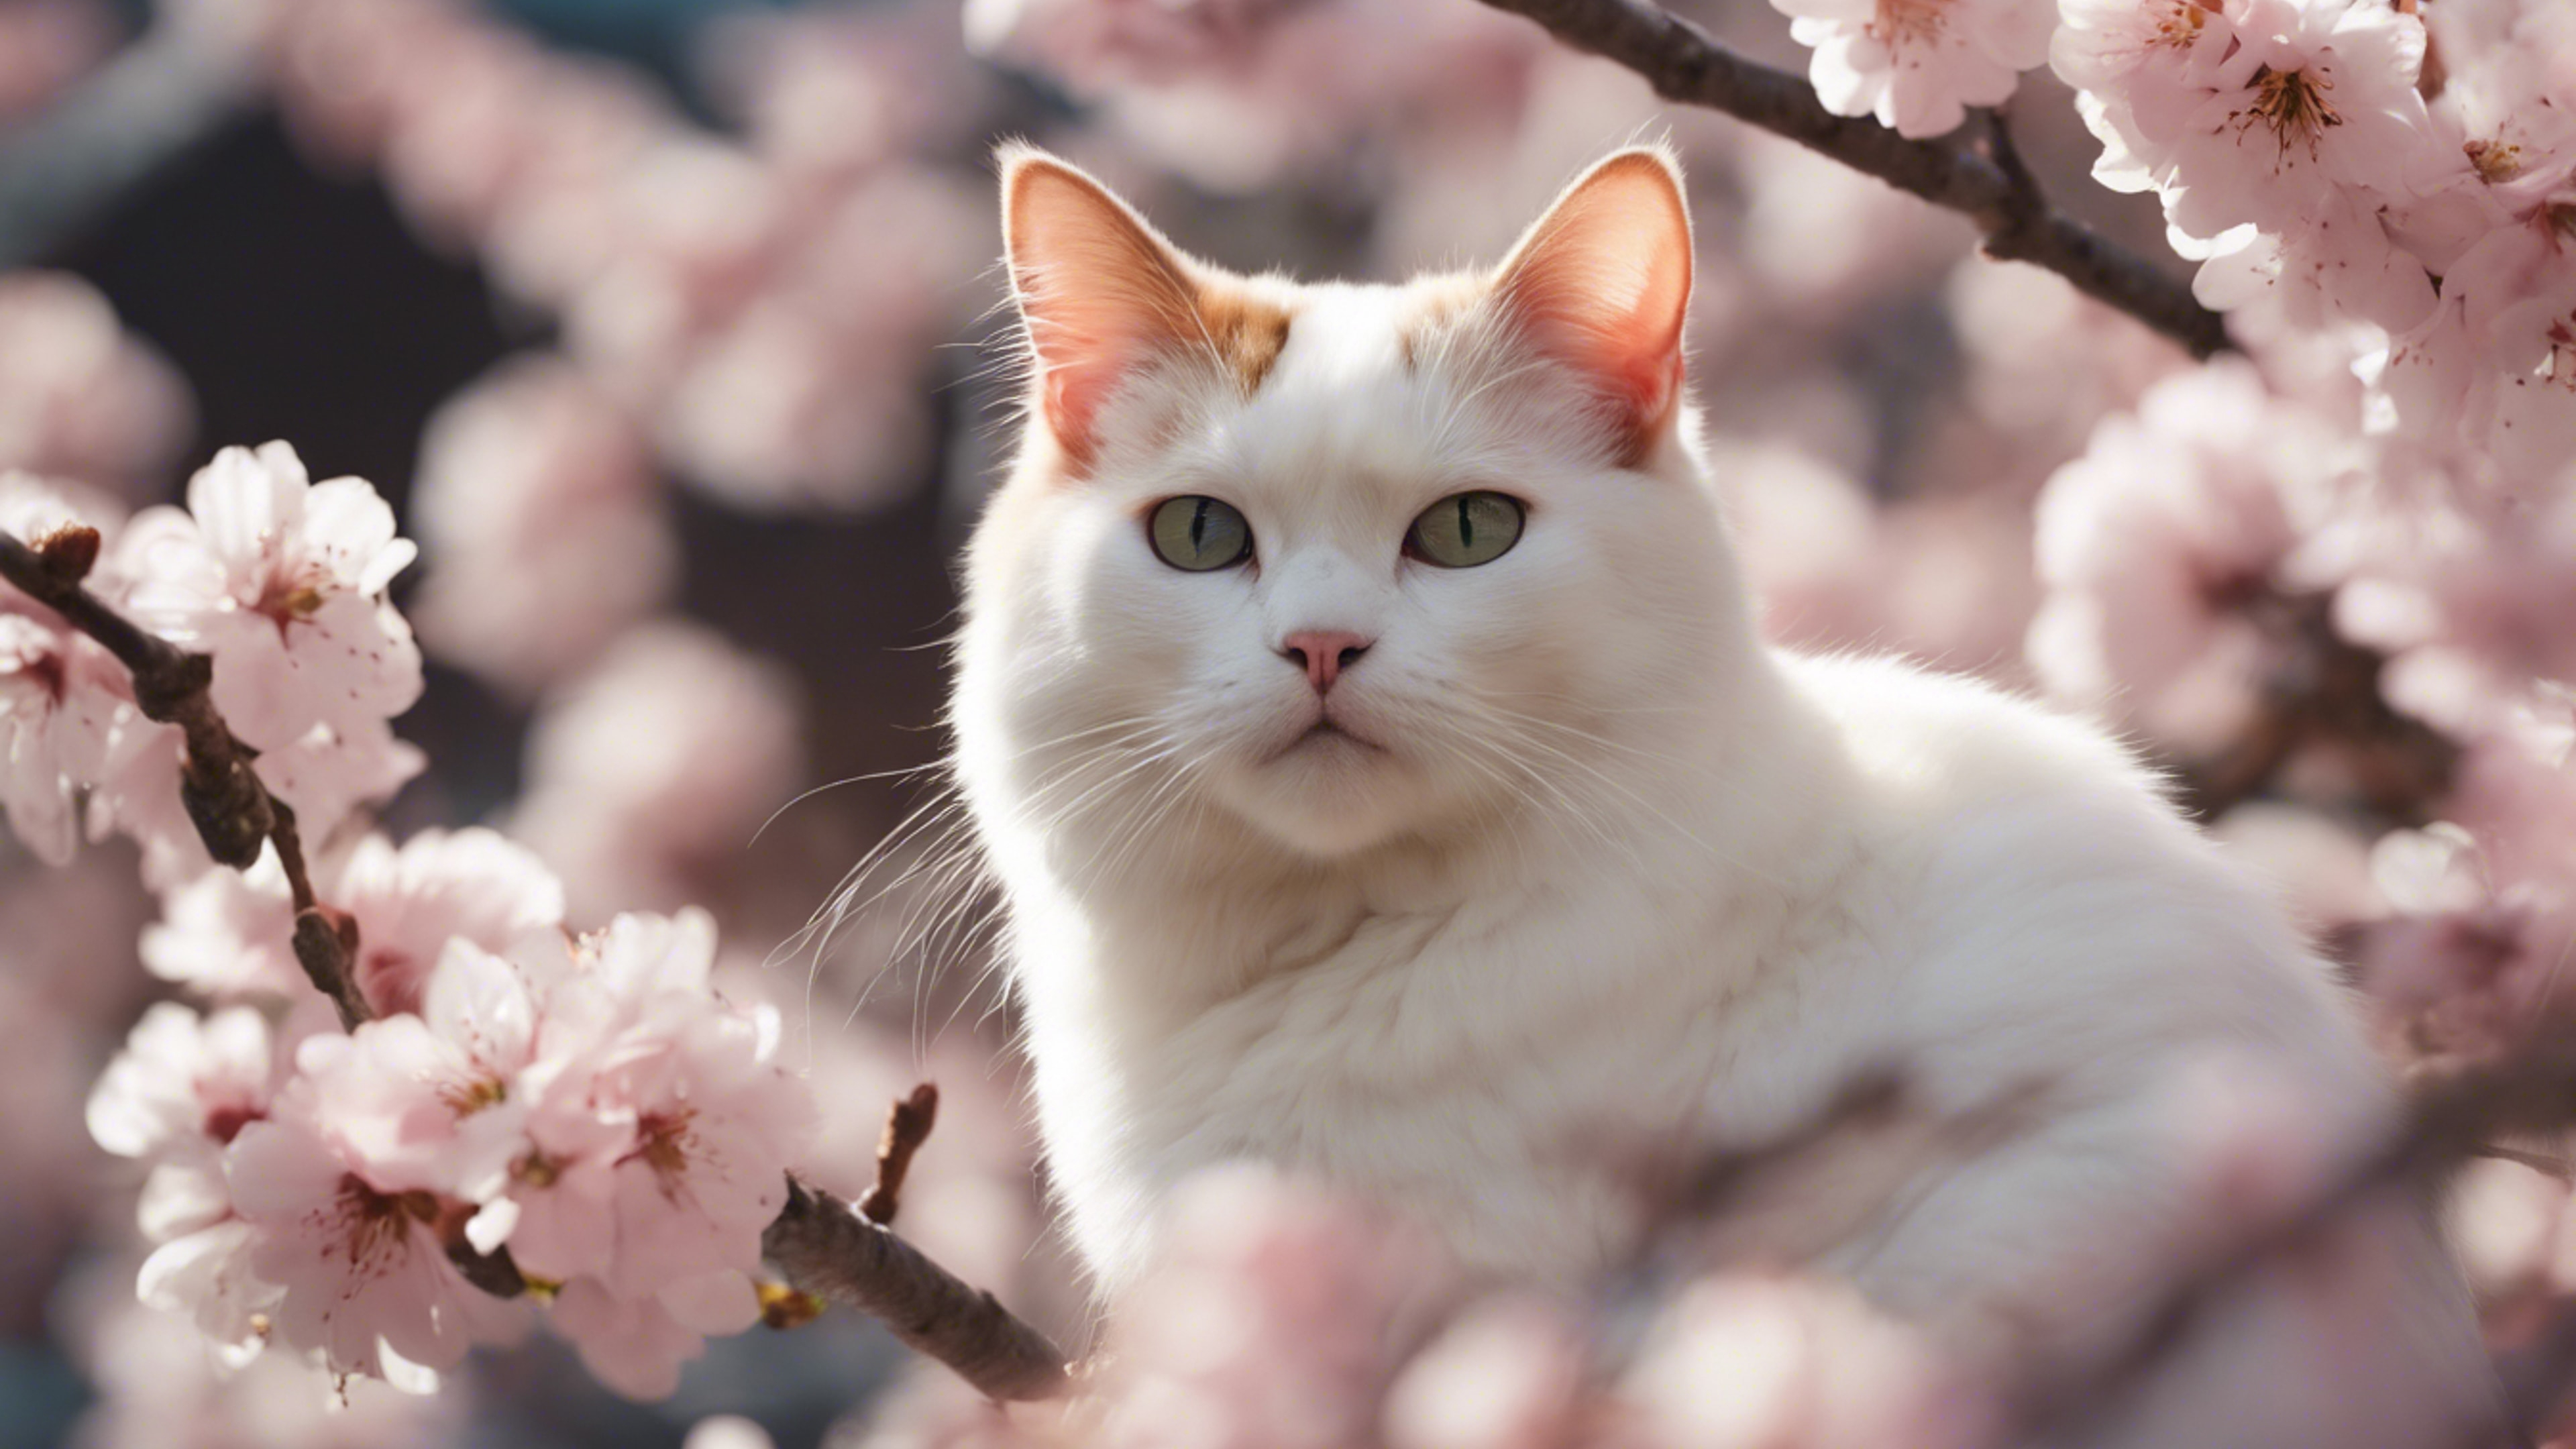 A Japanese Bobtail cat meditating under a cherry blossom tree at the peak of its bloom. Wallpaper[62820546f818474783c1]